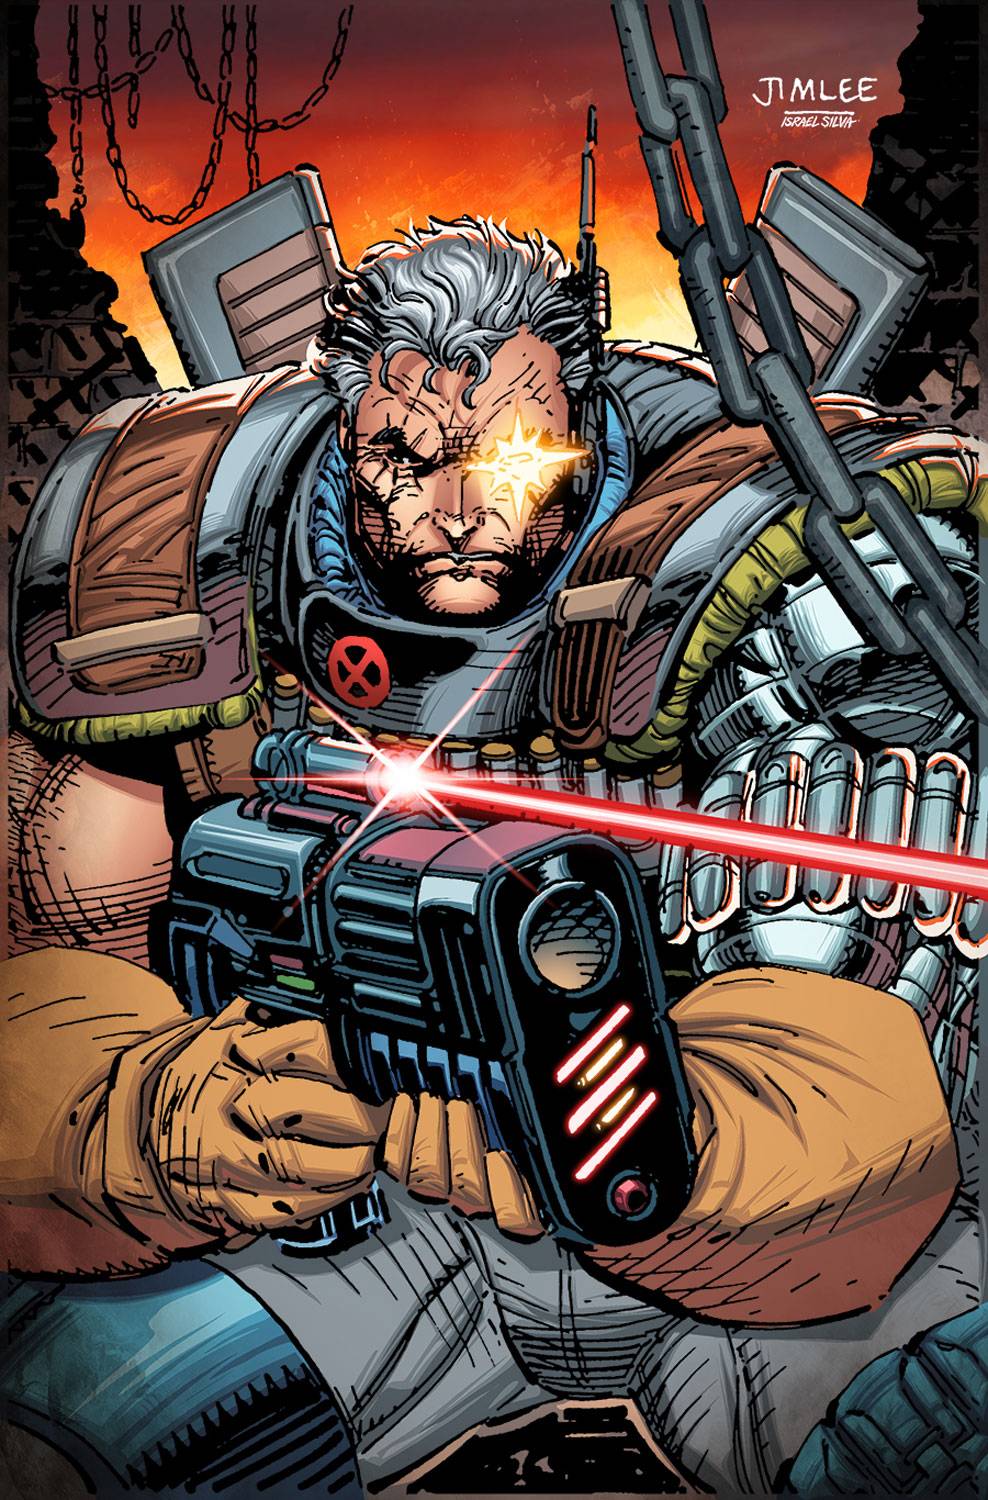 CABLE#3